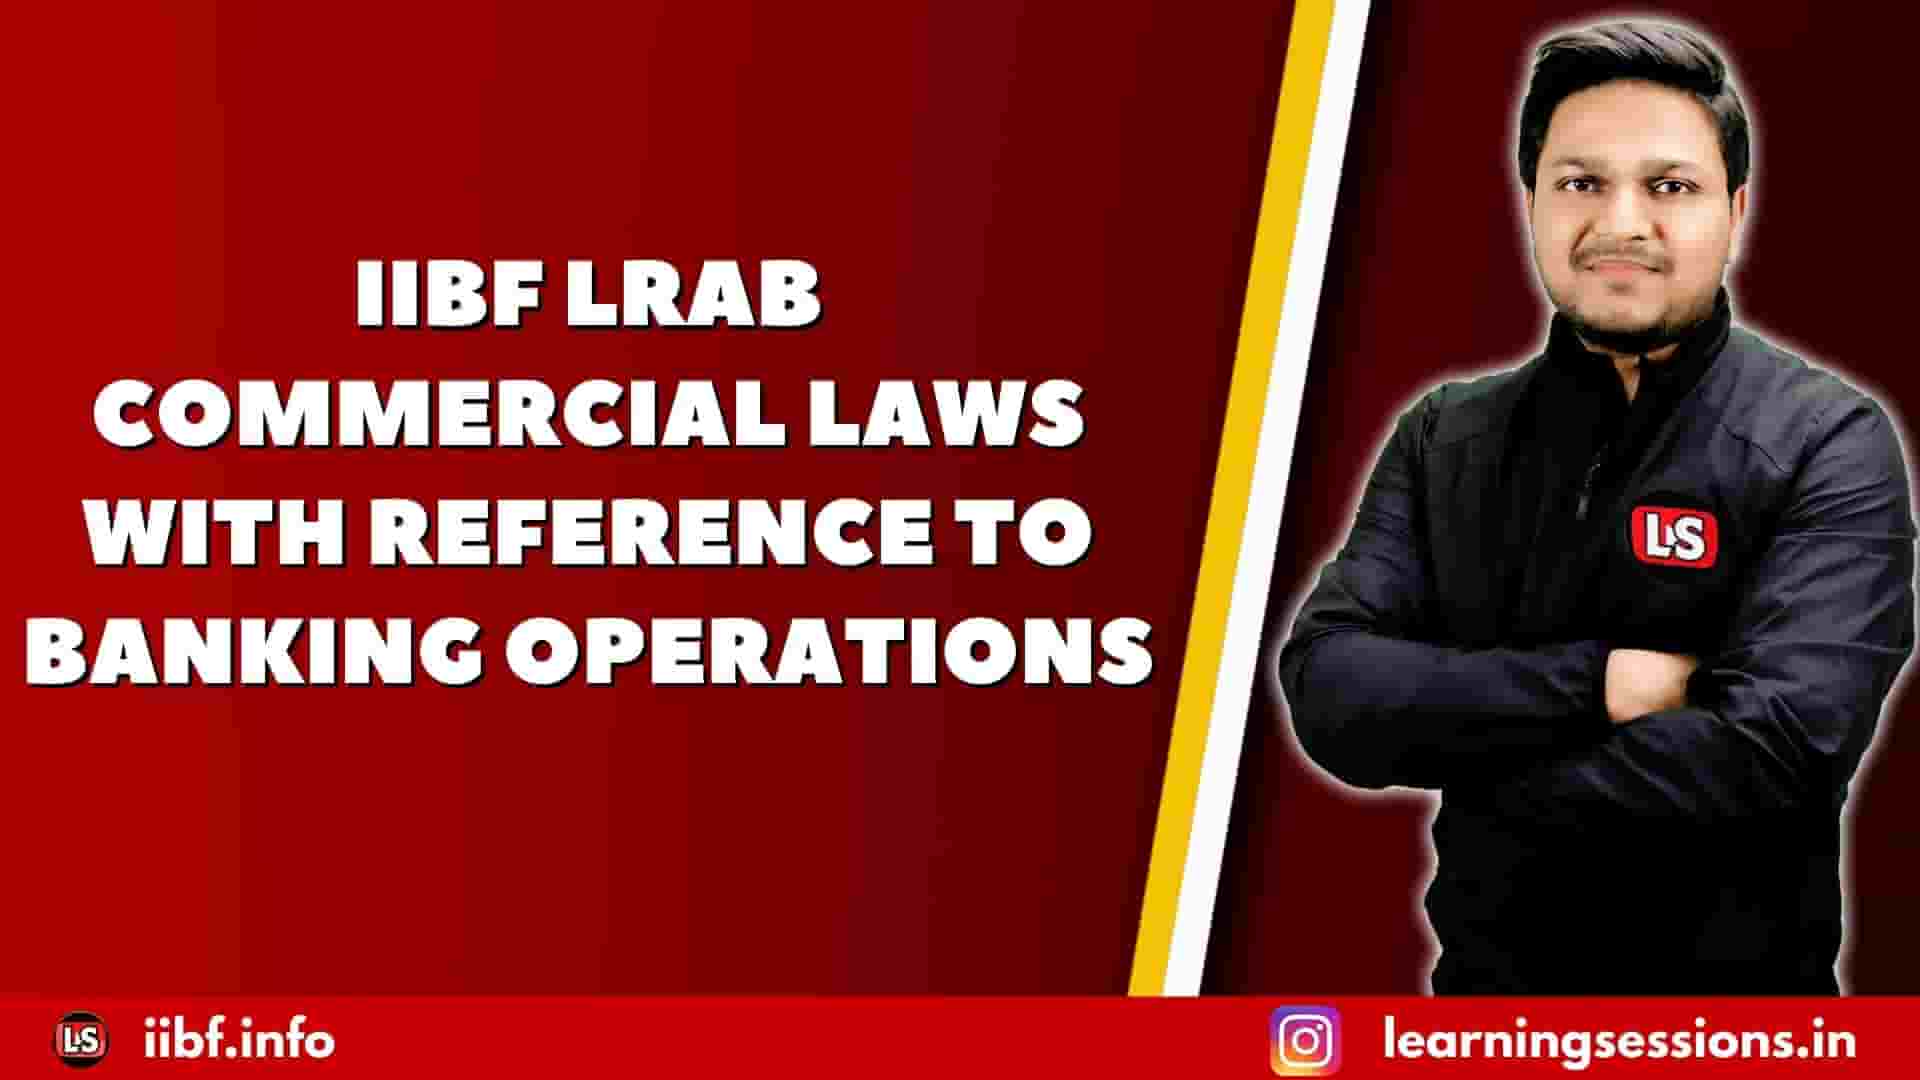 IIBF LRAB COMMERCIAL LAWS WITH REFERENCE TO BANKING OPERATIONS